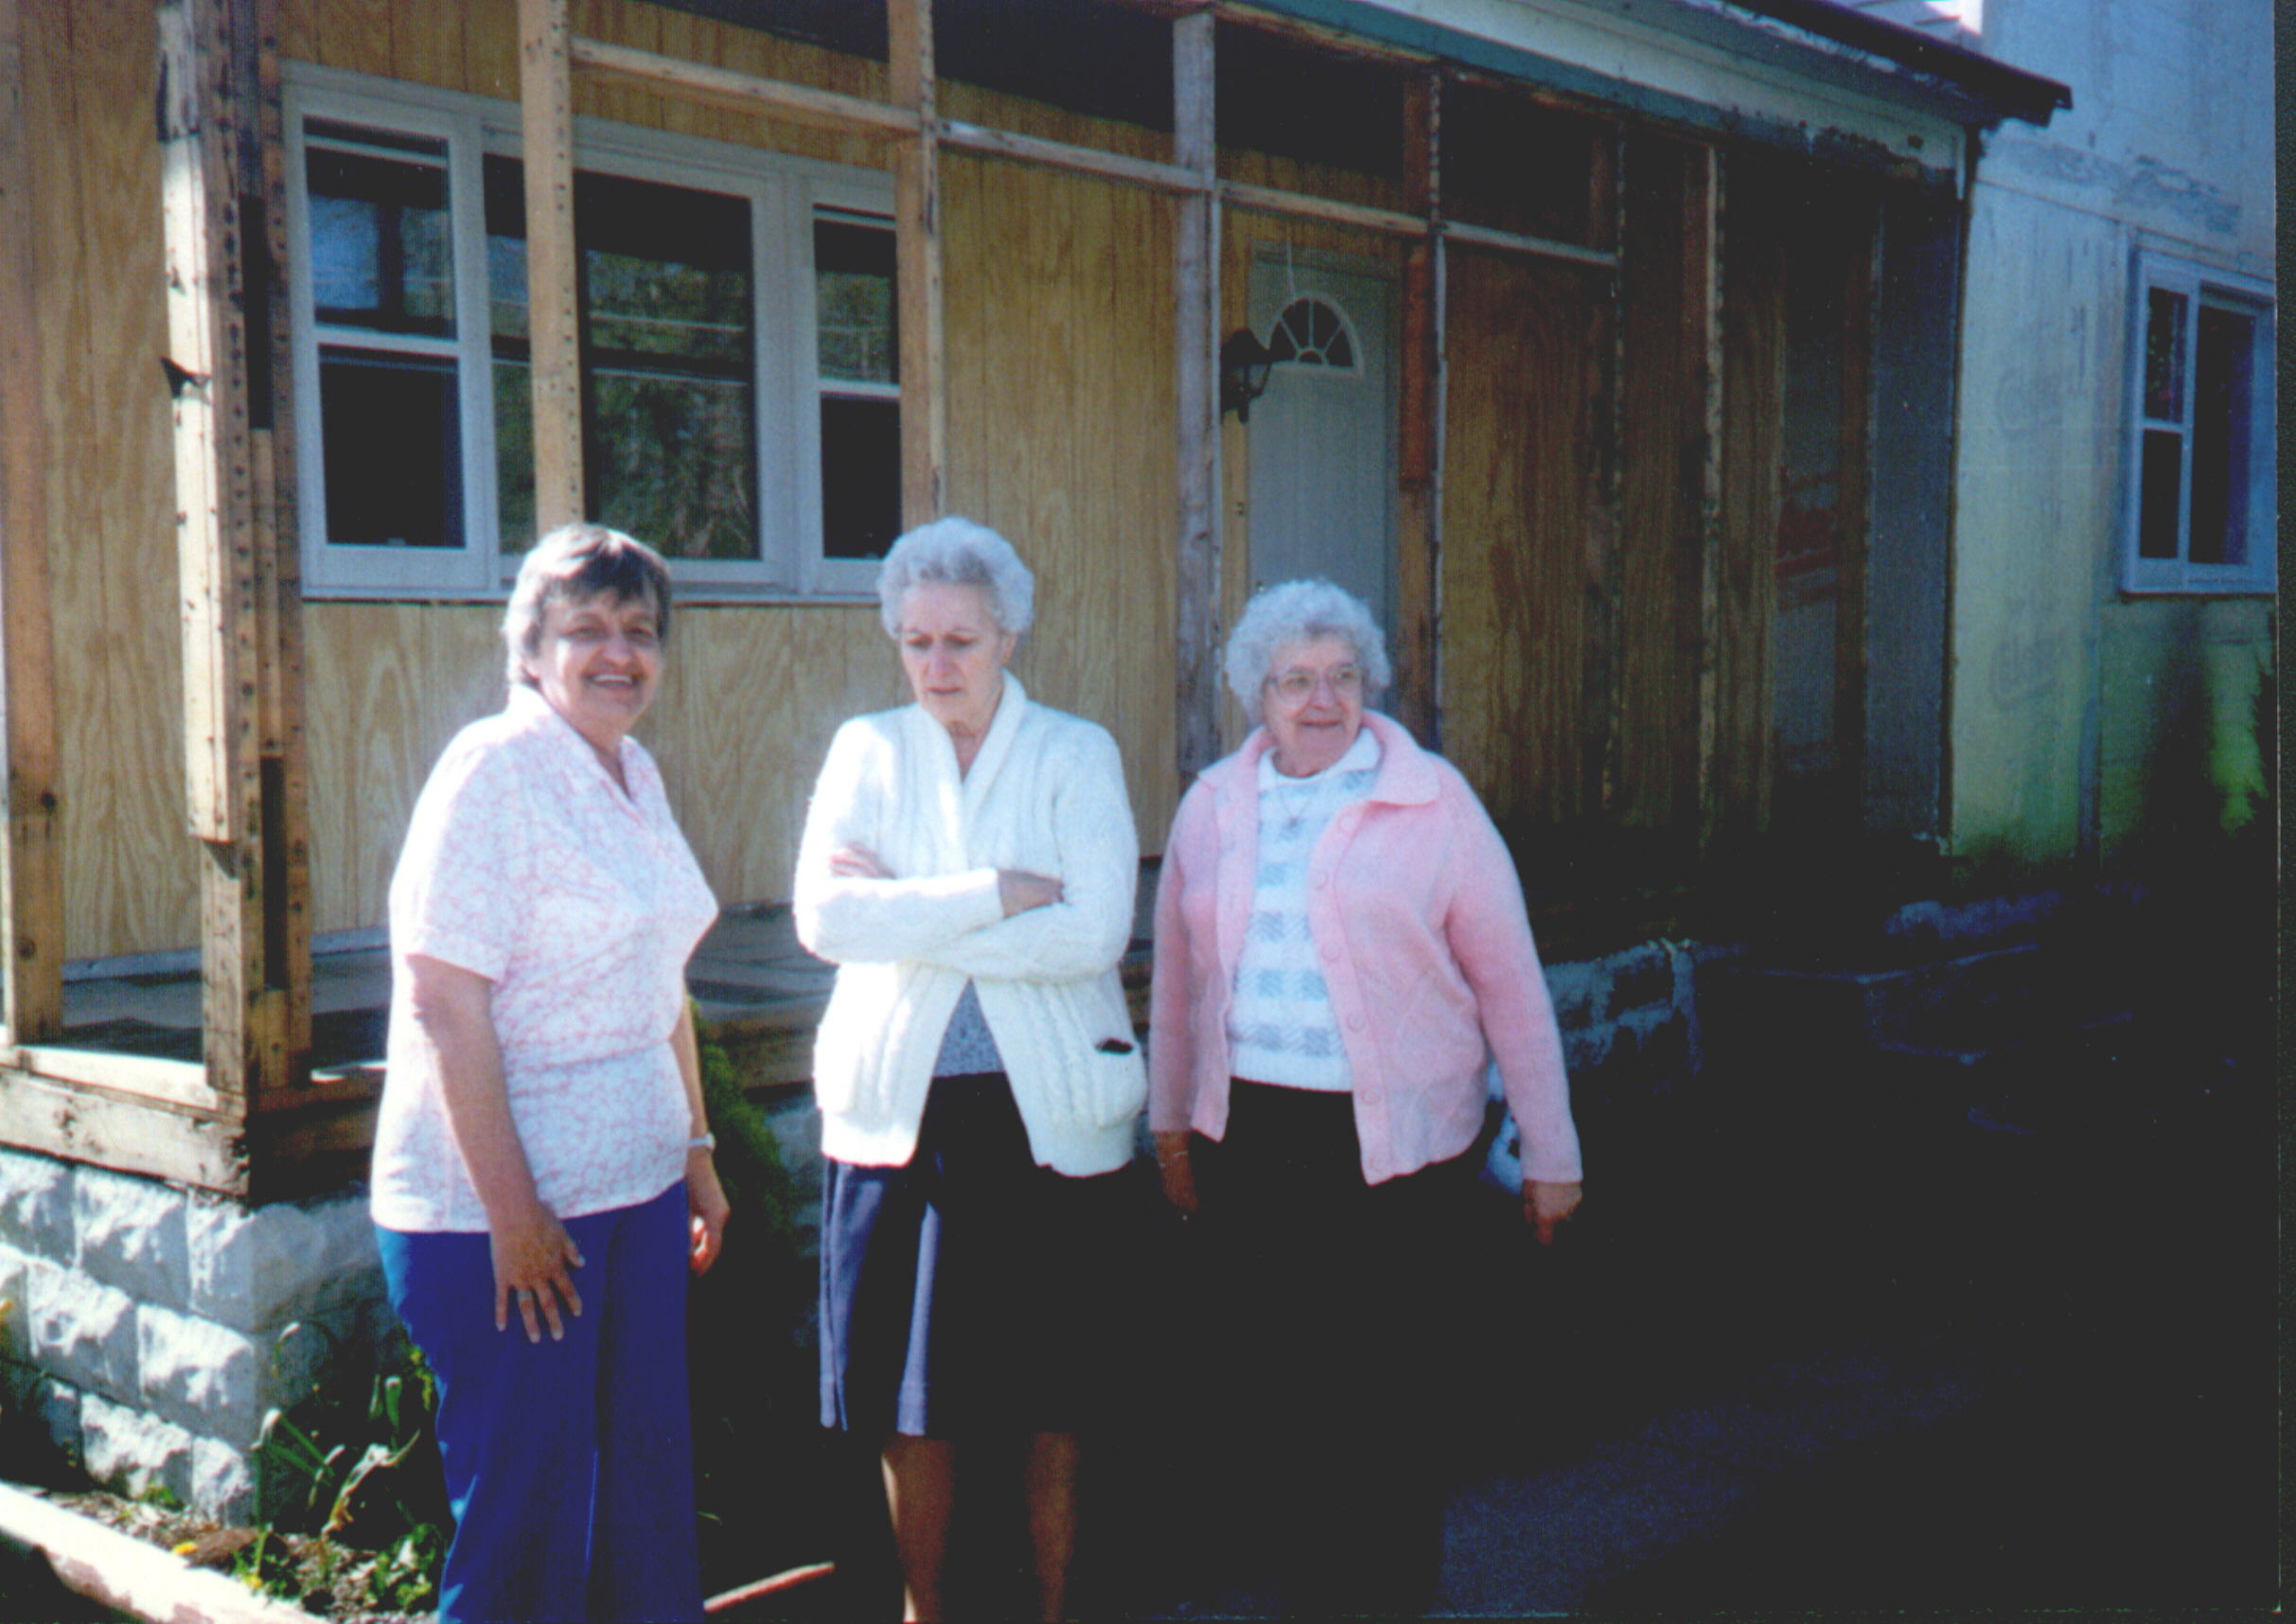 Joan Thines, Gertrude Franclemont, and Marge Thines in 1991